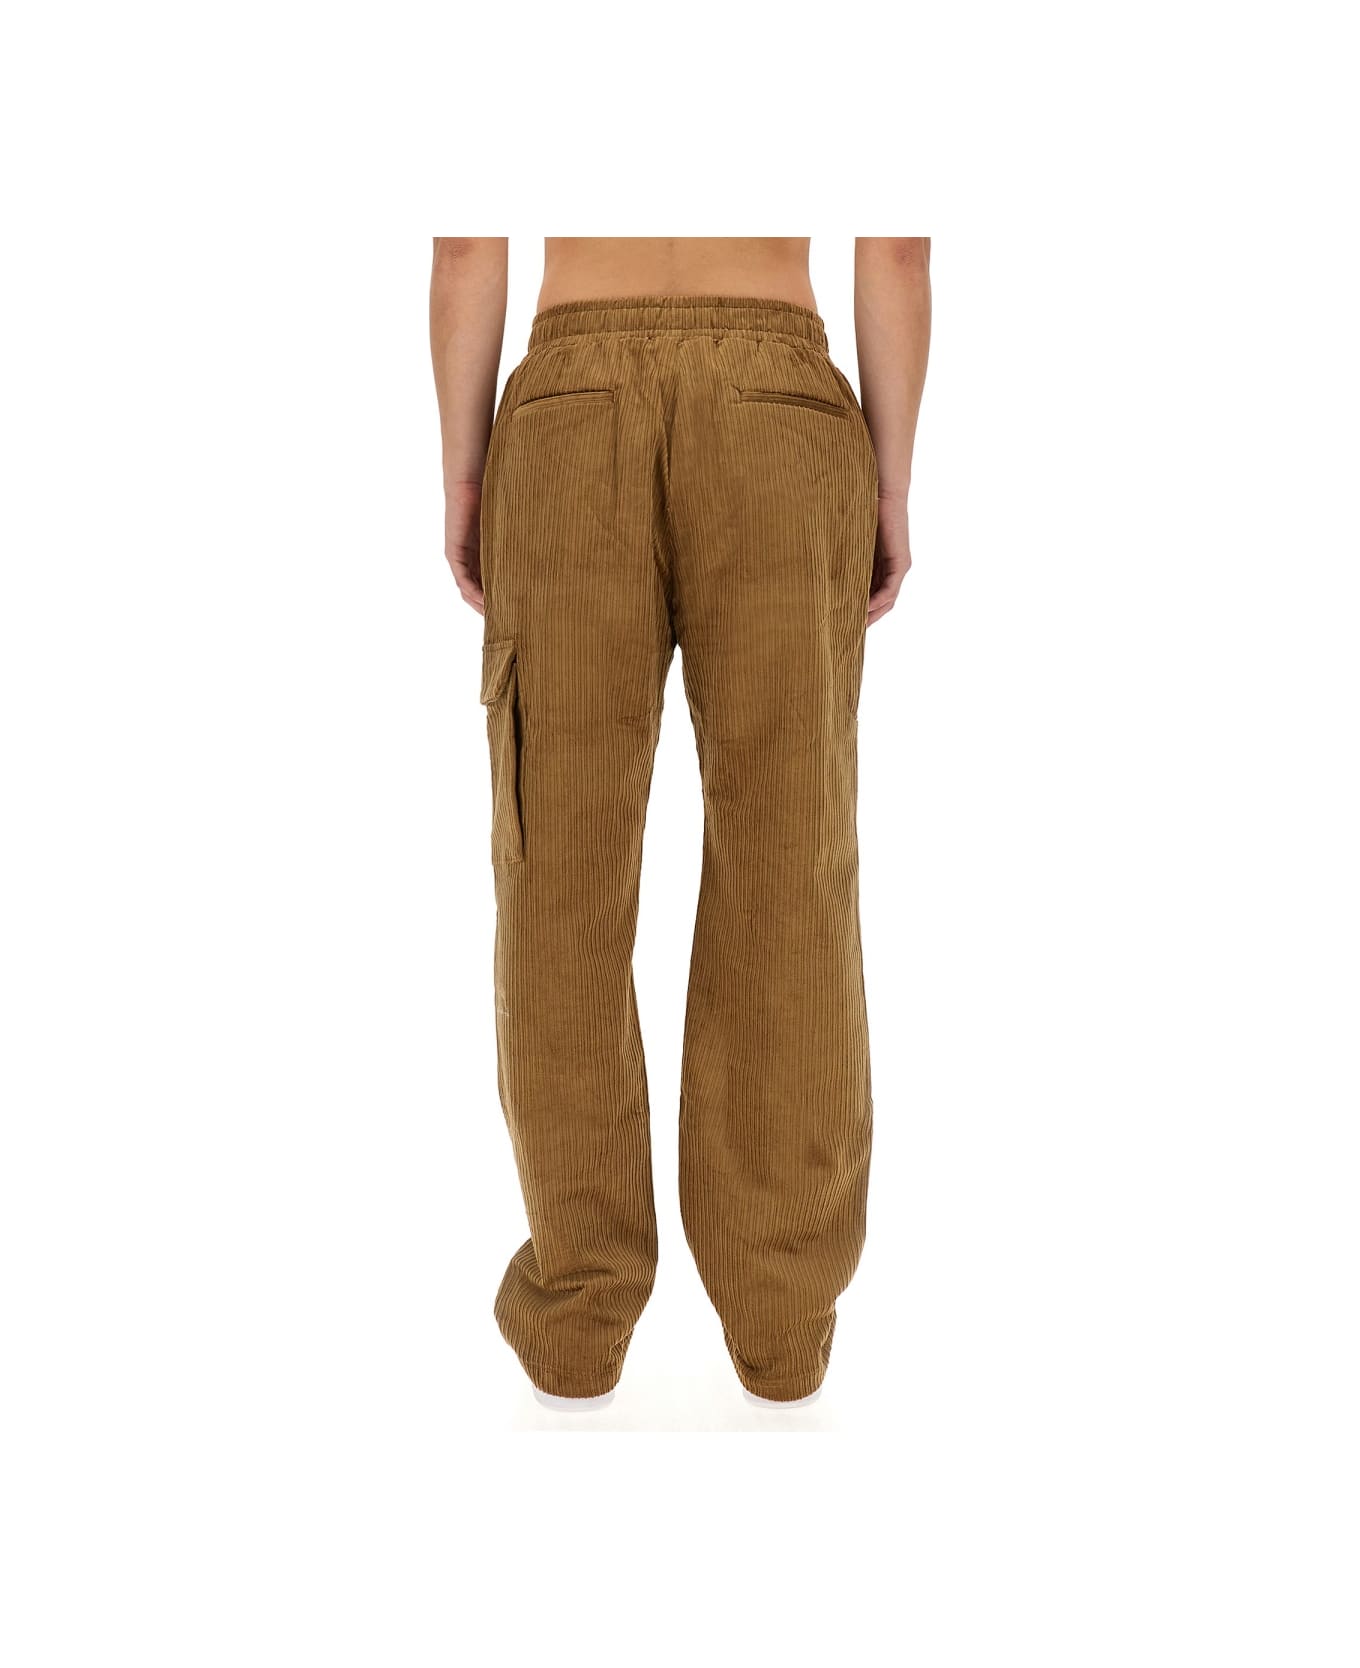 Family First Milano Cargo Pants - BEIGE